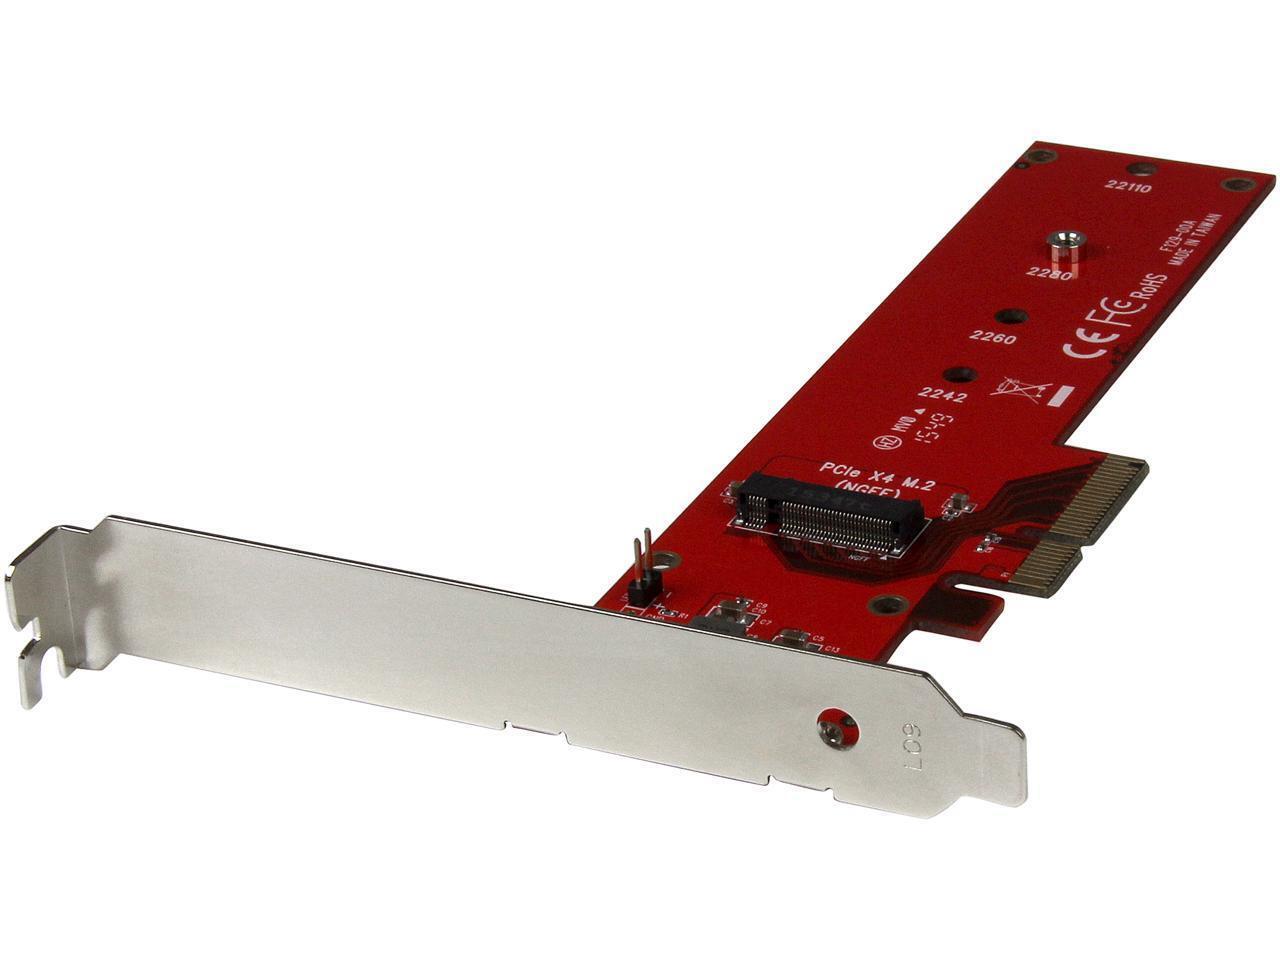 StarTech.com PEX4M2E1 M.2 Adapter - x4 PCIe 3.0 NVMe - Low Profile and Full